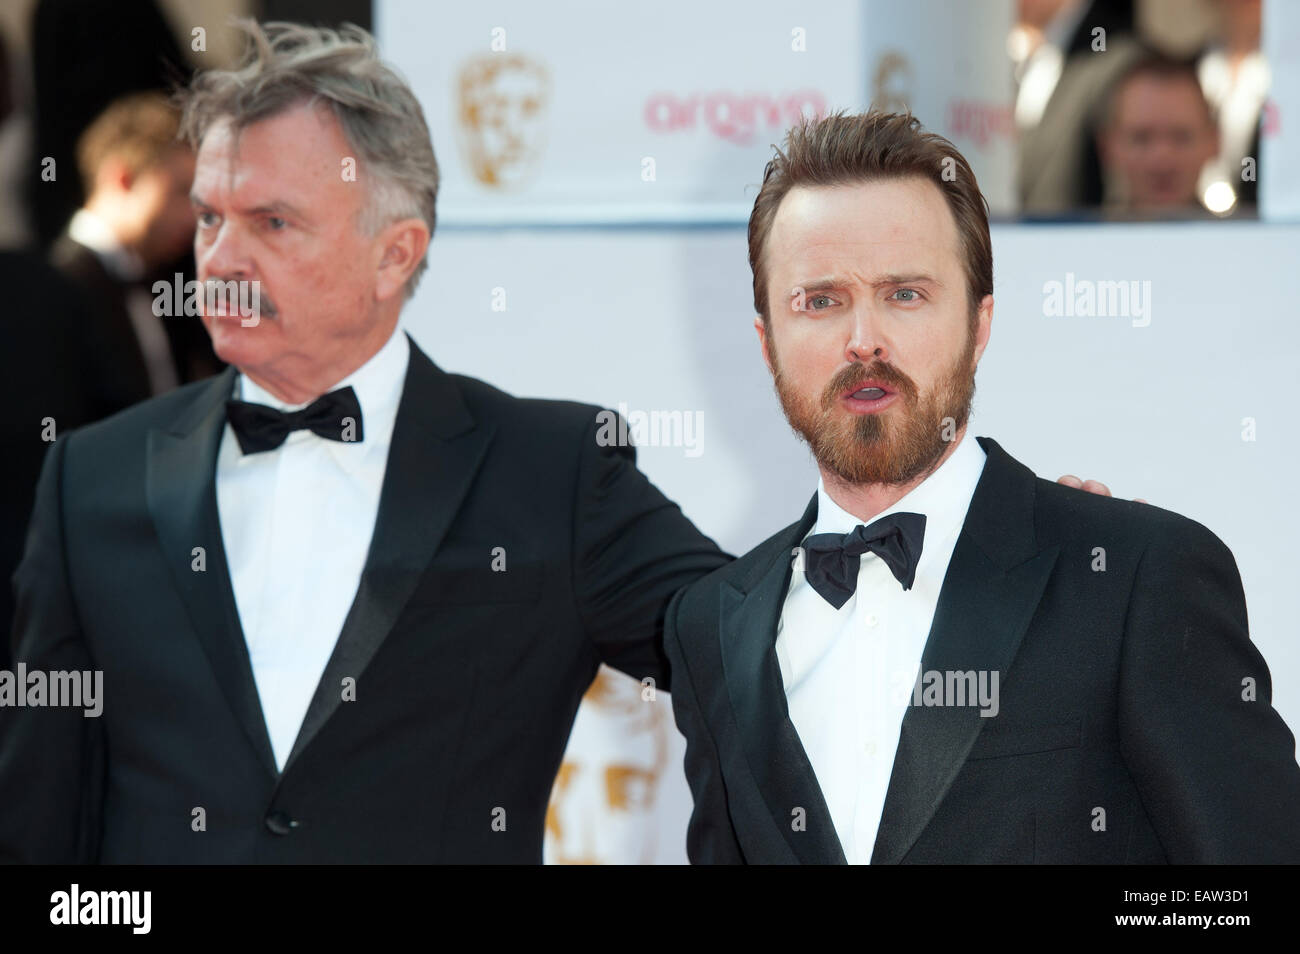 Arqiva British Academy Television Awards held at the Theatre Royal, Drury Lane - Arrivals.  Featuring: Sam Neill, Aaron Paul Where: London, United Kingdom When: 18 May 2014 Stock Photo